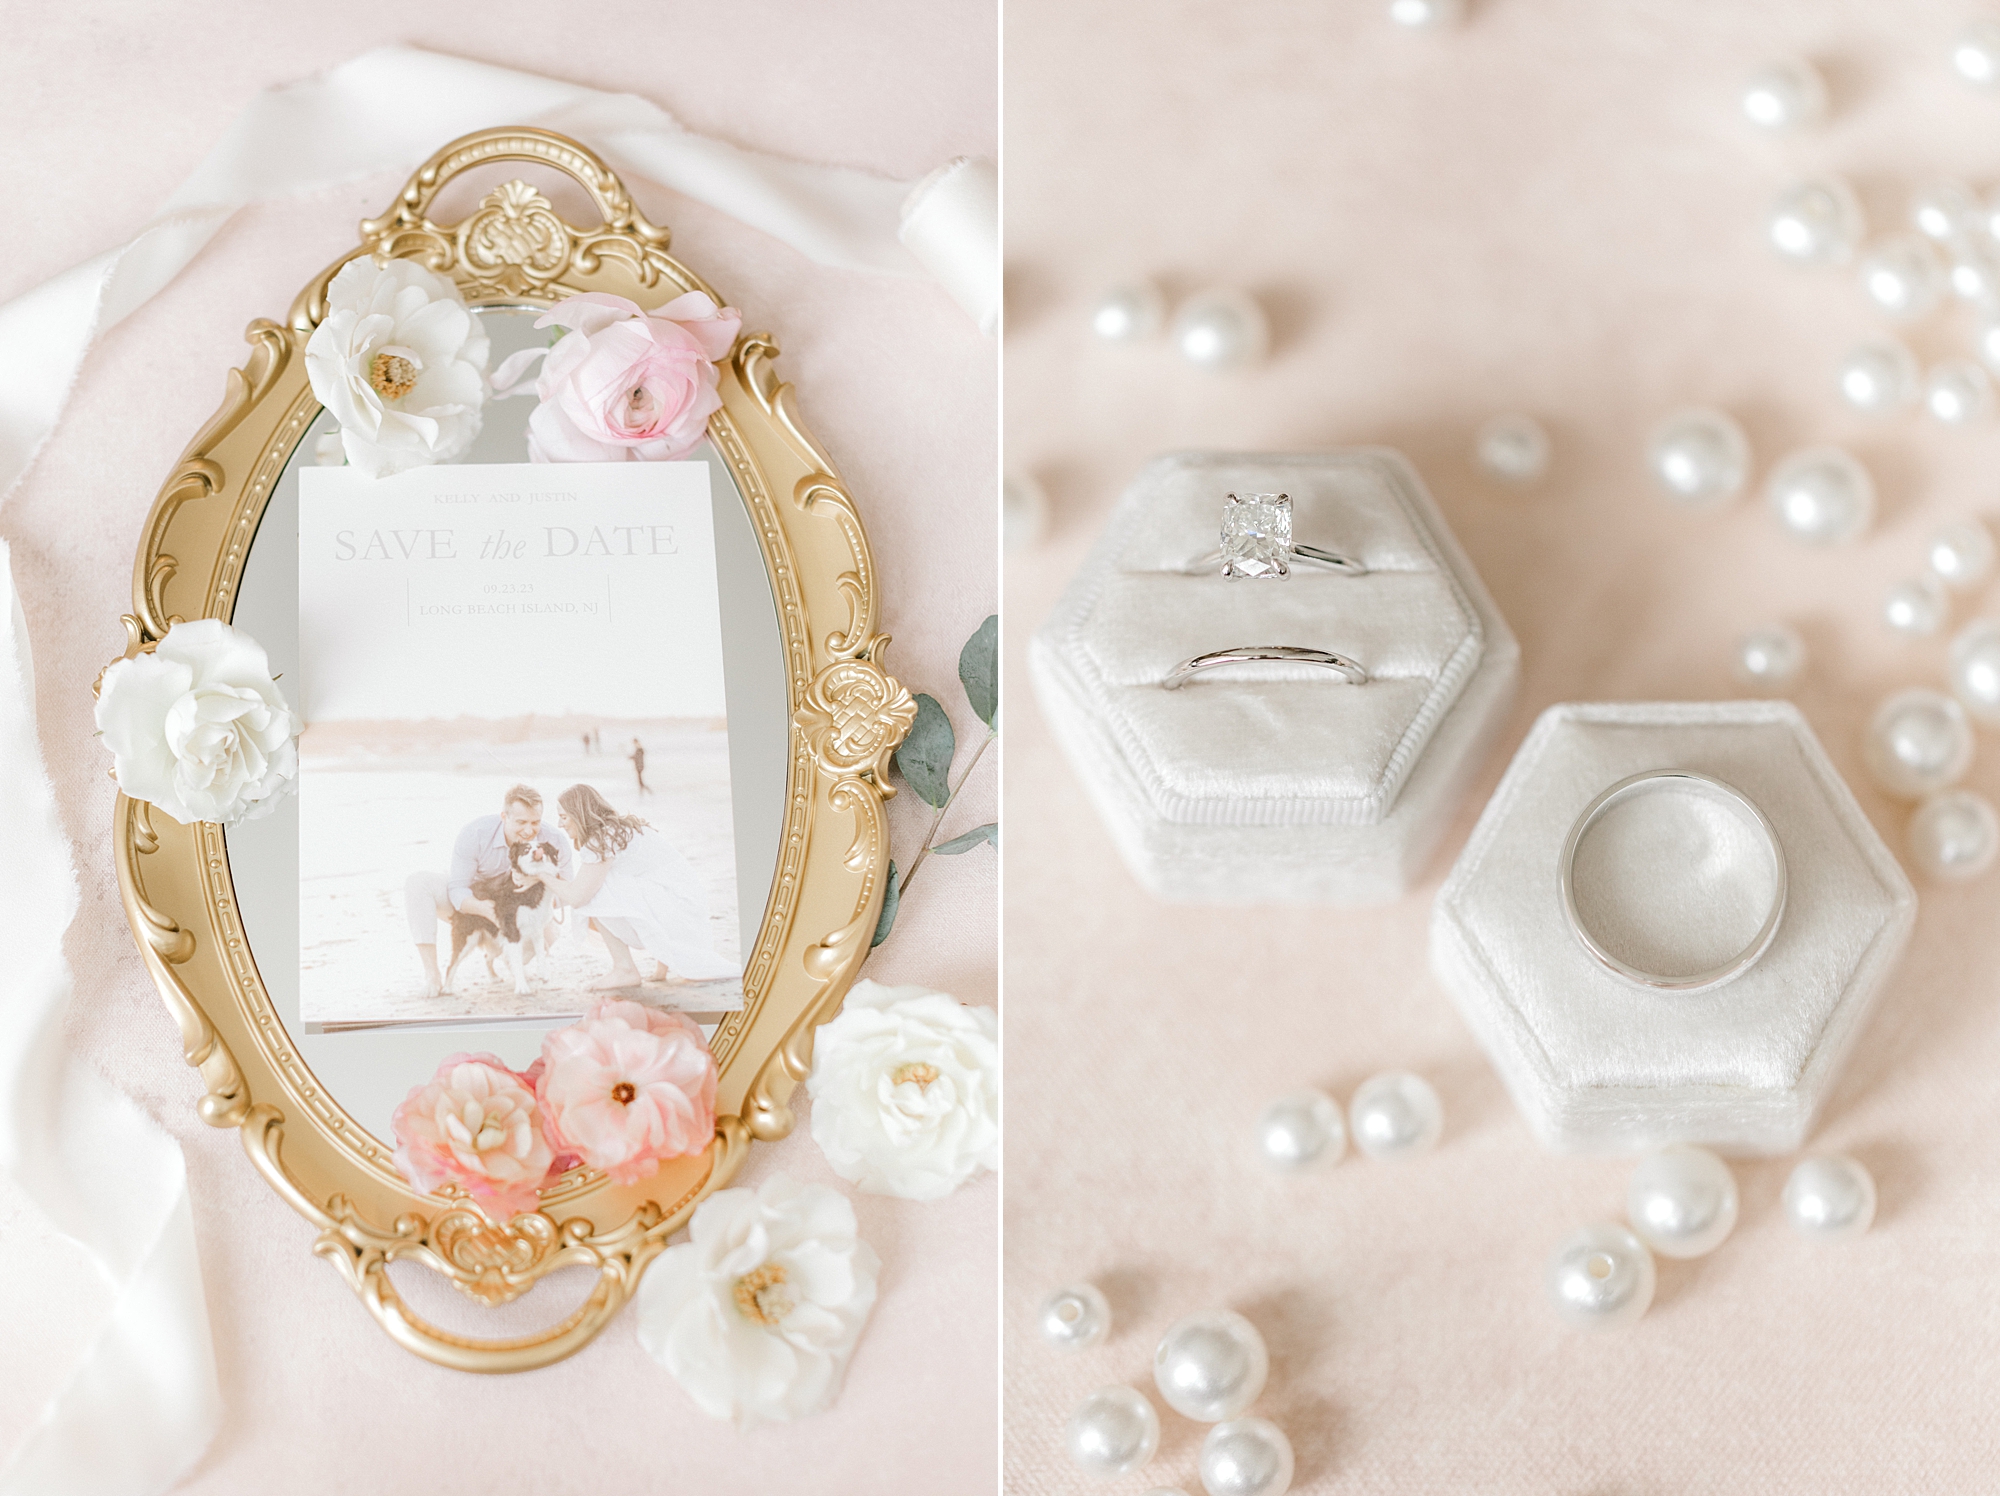 Long Beach Island wedding details with ivory ring box, and gold tray for invitation suite